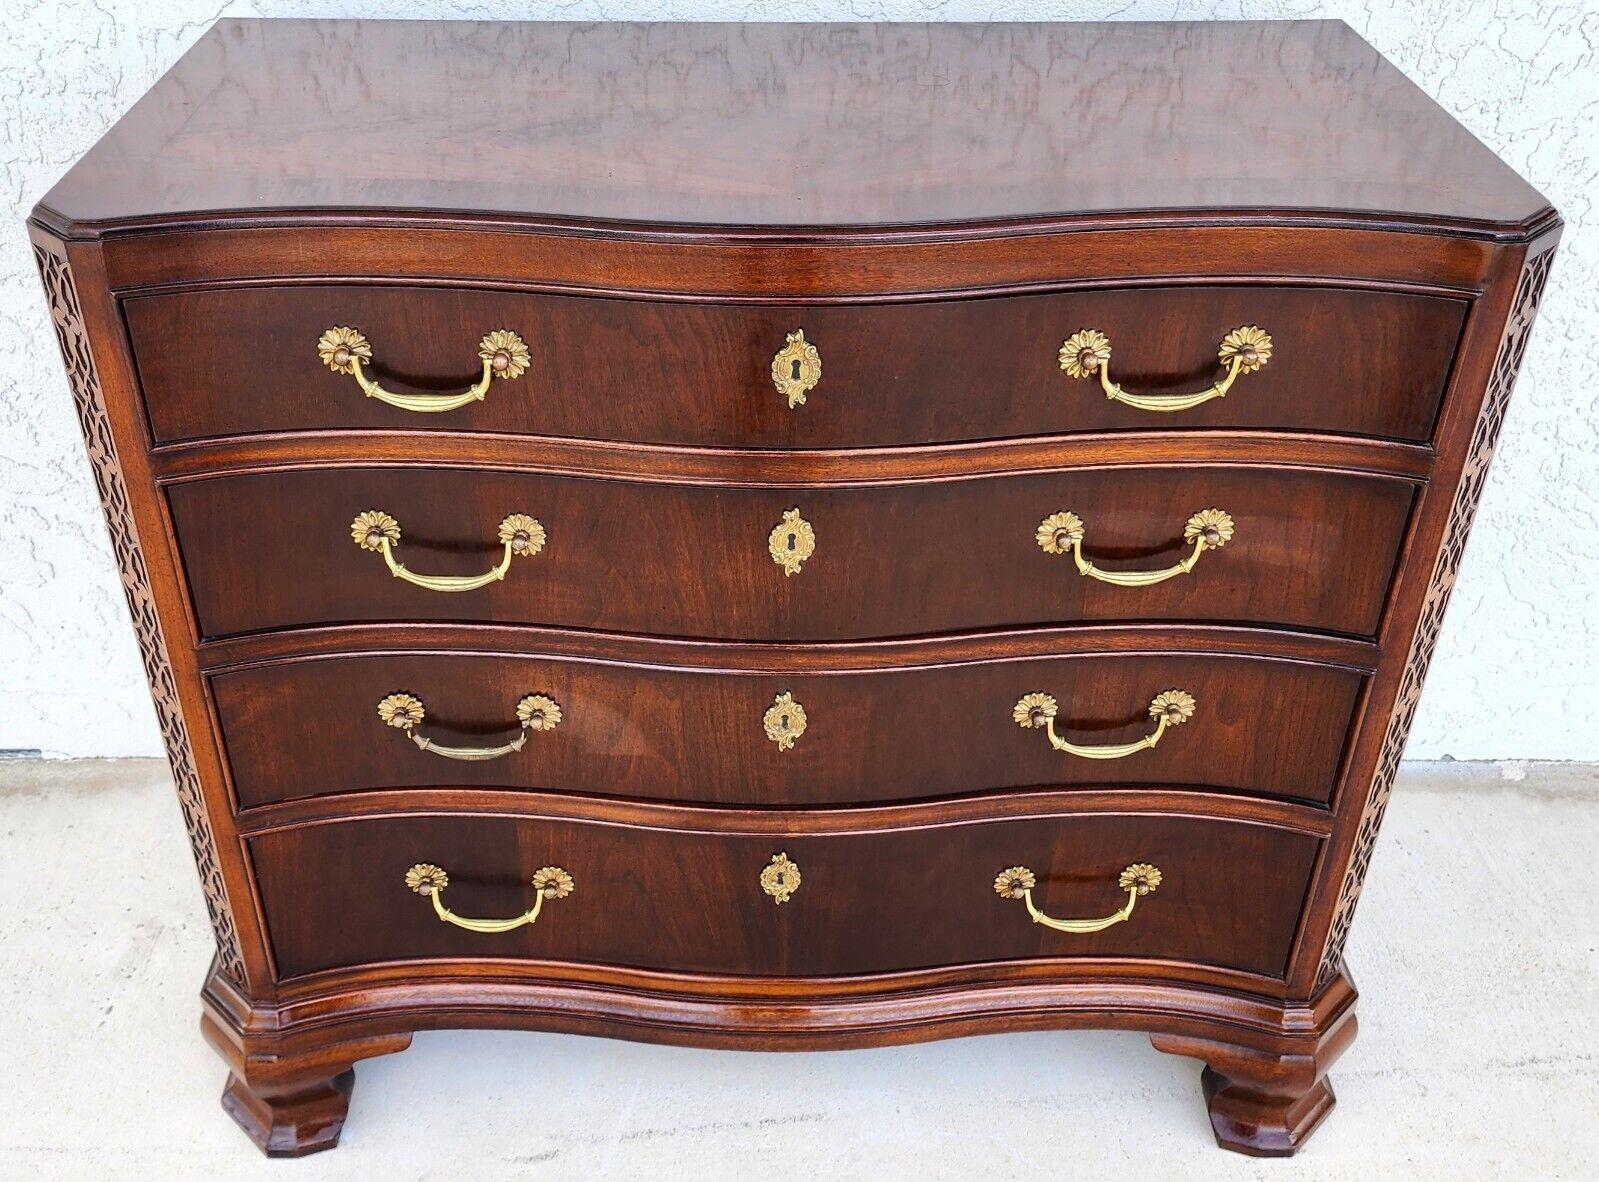 For FULL item description click on CONTINUE READING at the bottom of this page.

Offering One Of Our Recent Palm Beach Estate Fine Furniture Acquisitions Of A
Magnificent Vintage Chippendale George III Style Mahogany Serpentine Chest Of Drawers by